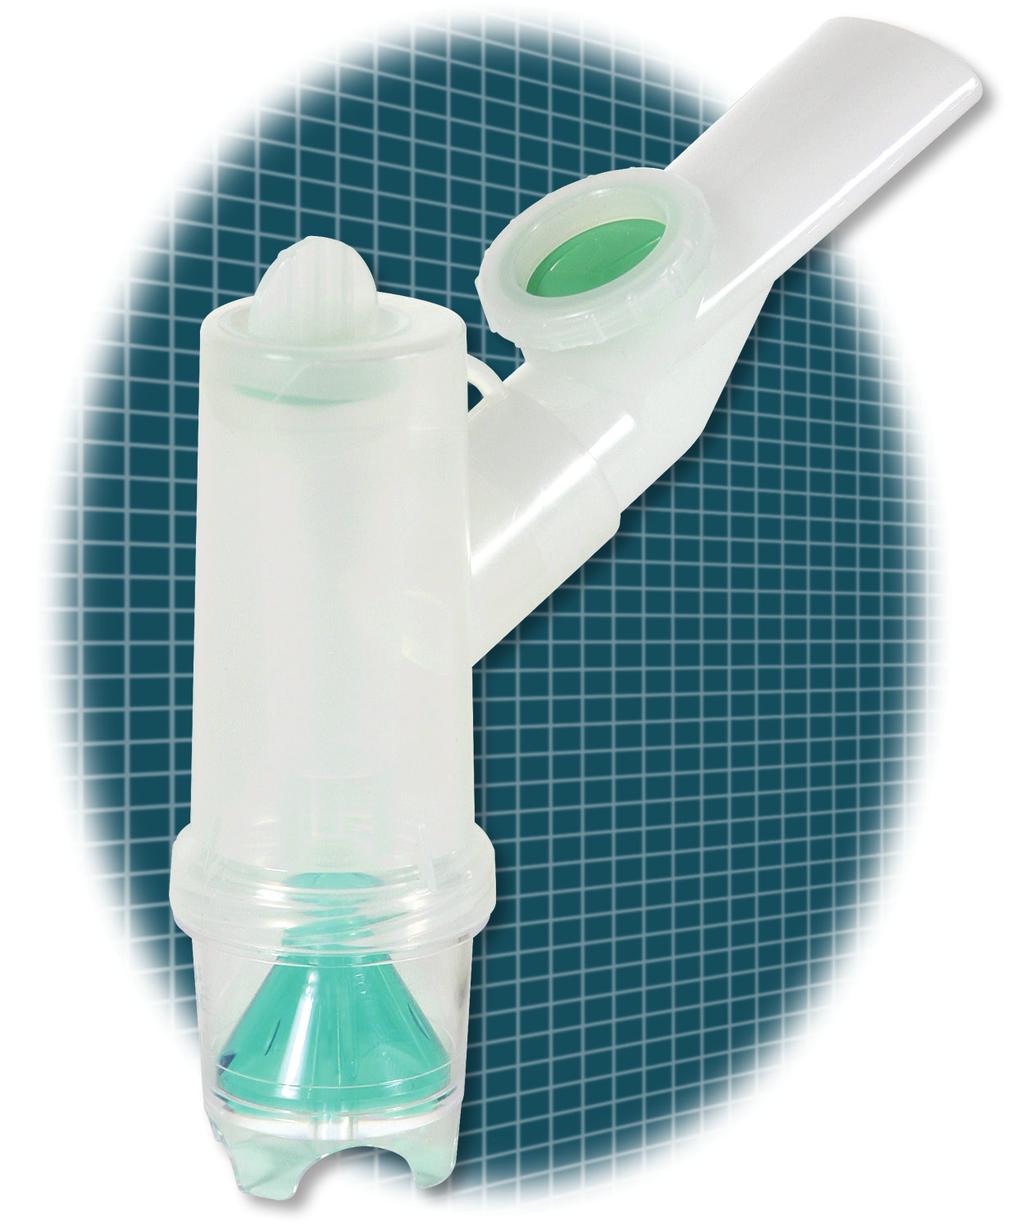 Latex Free Breath Enhanced High Density Jet Nebulizer The NebuTech HDN nebulizer, a revolutionary breath enhanced design, by Salter Labs is quickly becoming the product of choice for caregivers and